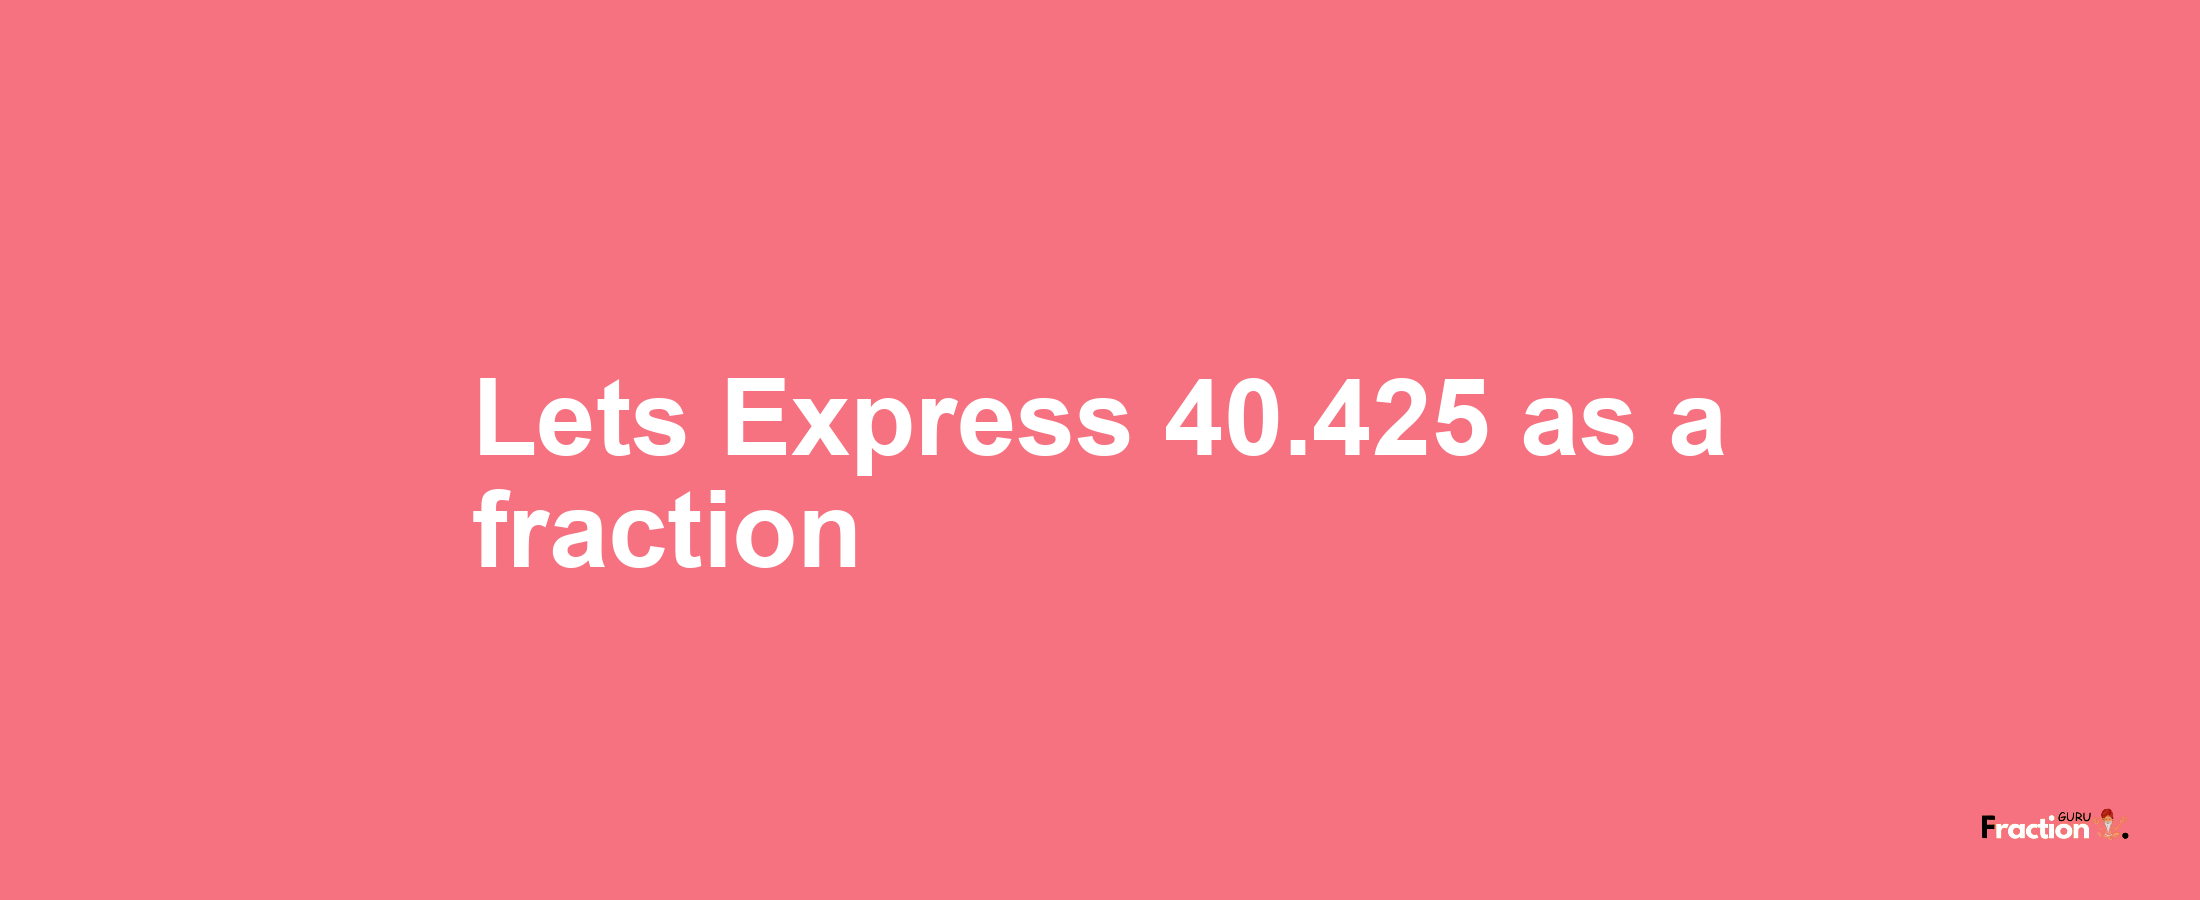 Lets Express 40.425 as afraction